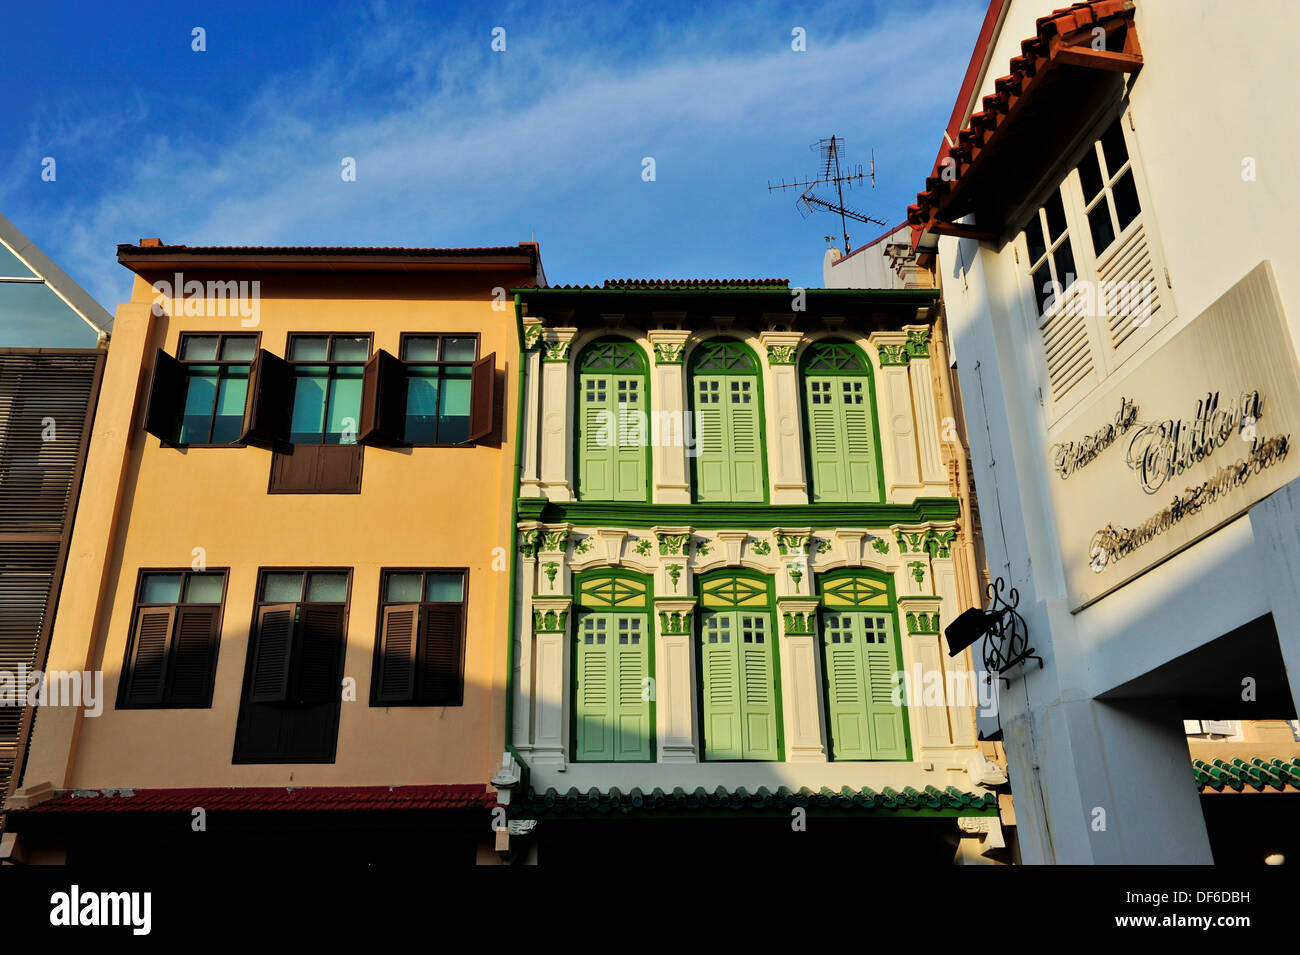 Rows of conserved shophouses in Singapore Stock Photo